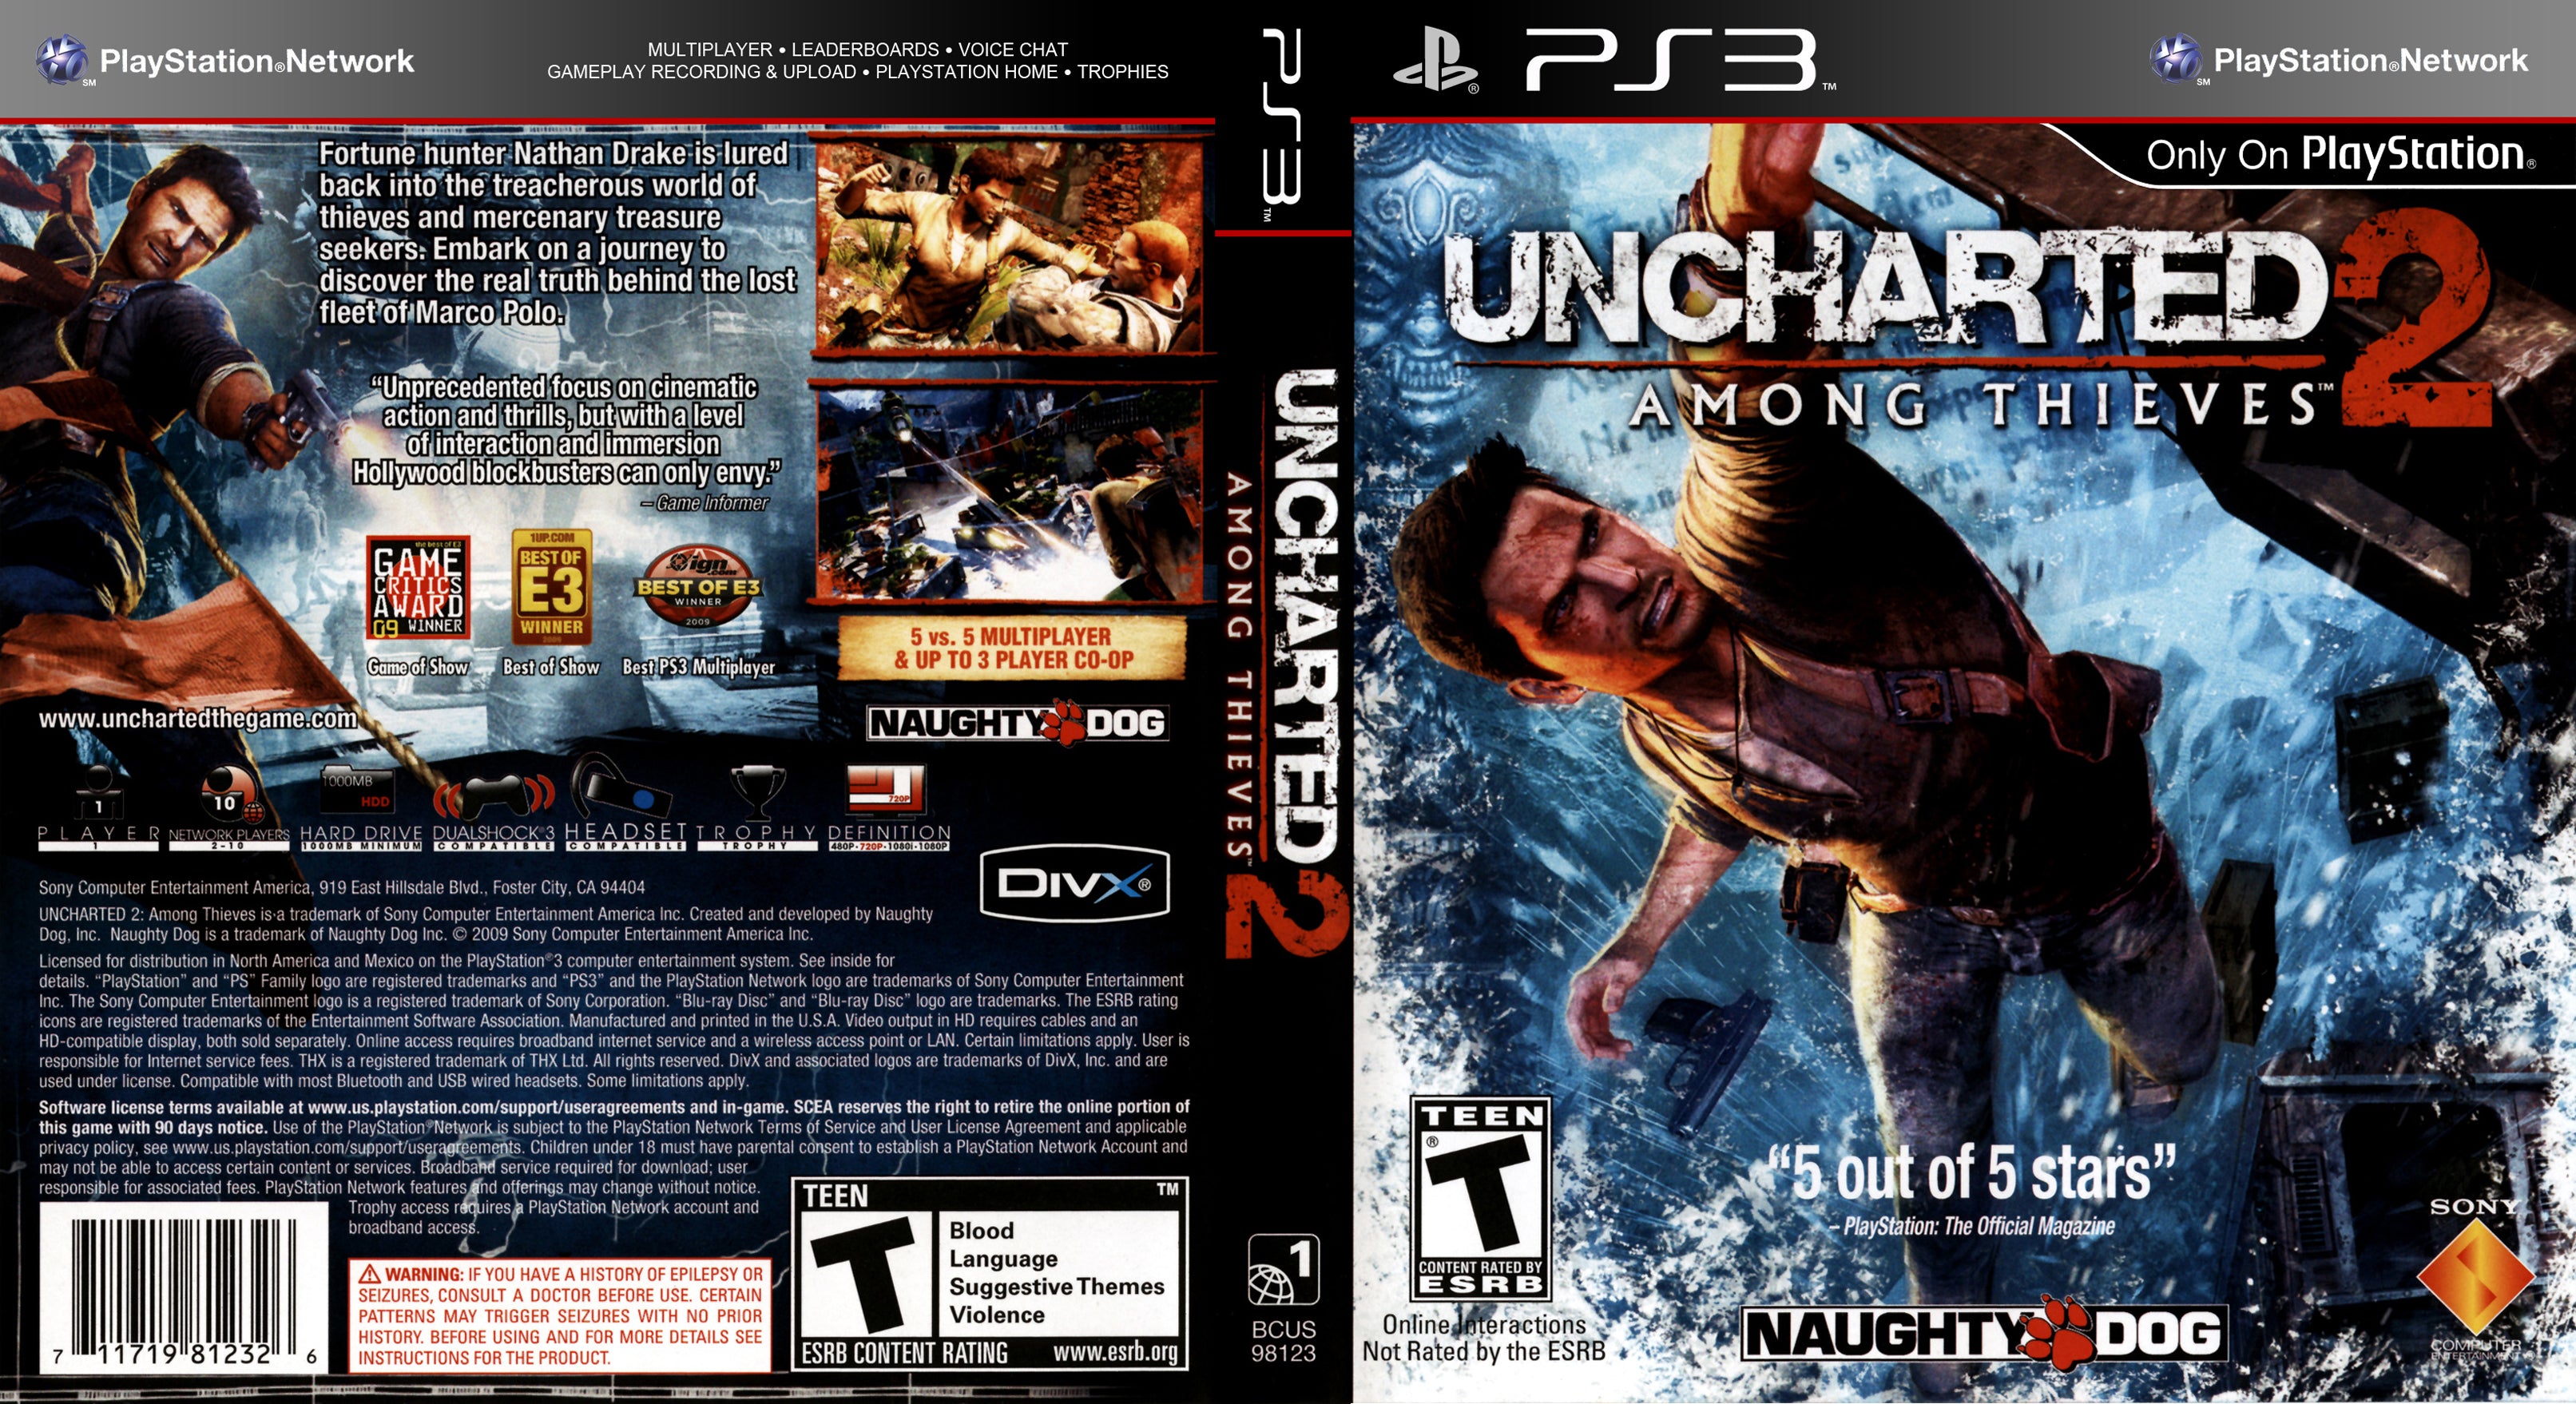 Games like Uncharted 2: Among Thieves • Games similar to Uncharted